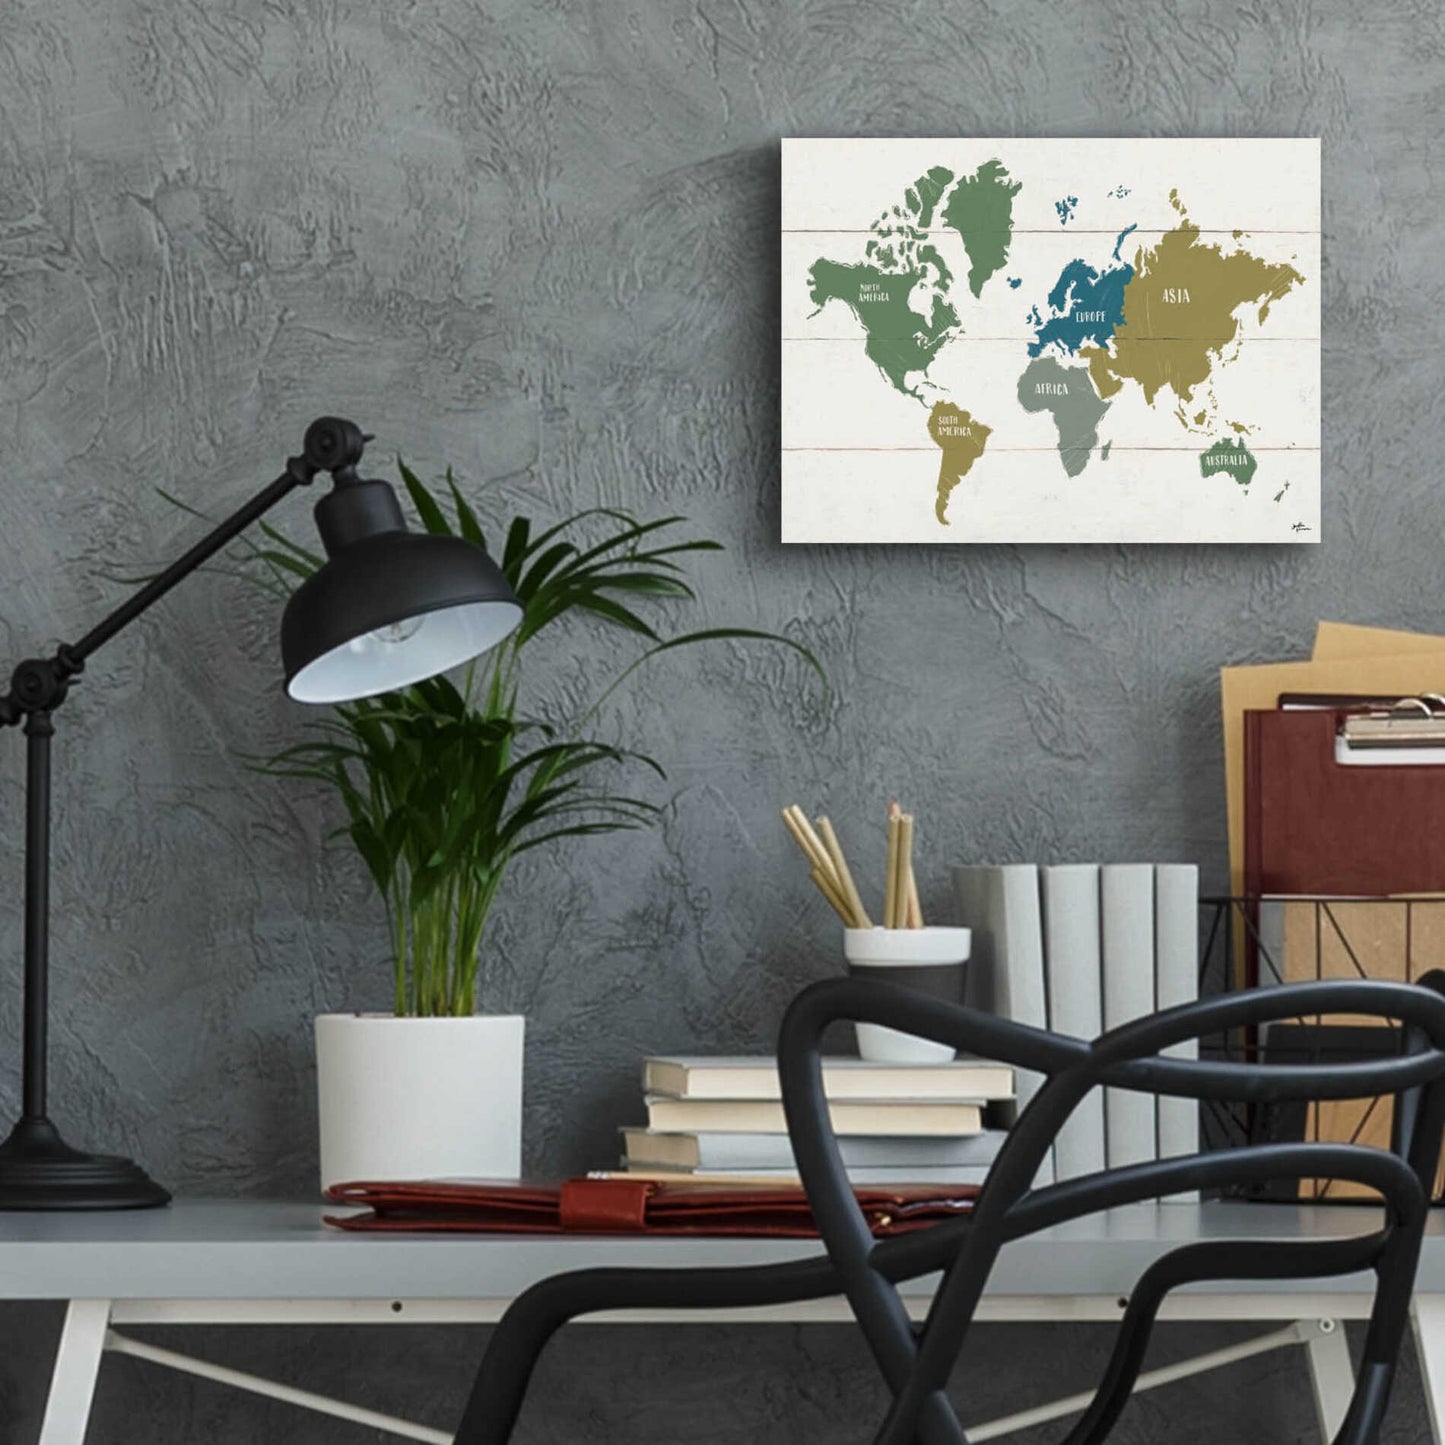 Epic Art 'Peace and Lodge World Map' by Janelle Penner, Acrylic Glass Wall Art,16x12